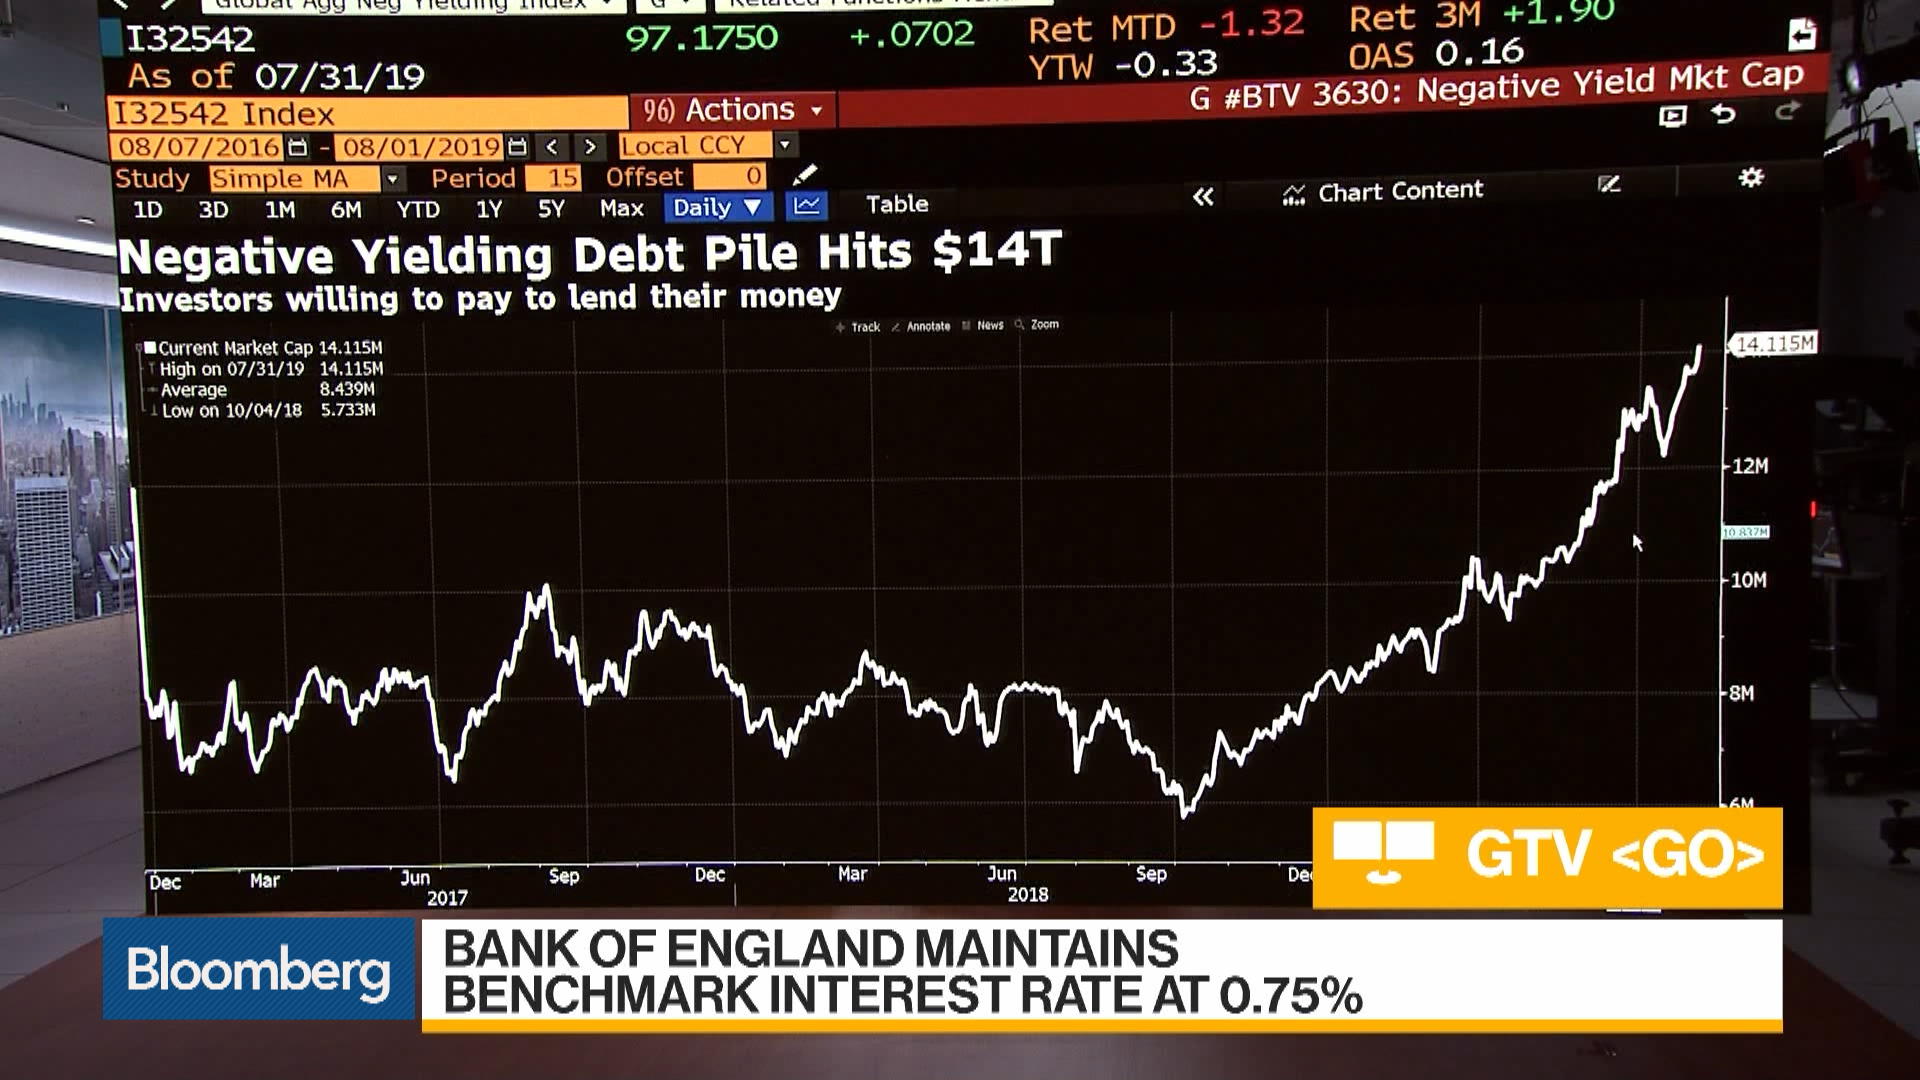 Bloomberg Barclays Us Aggregate Bond Index Chart